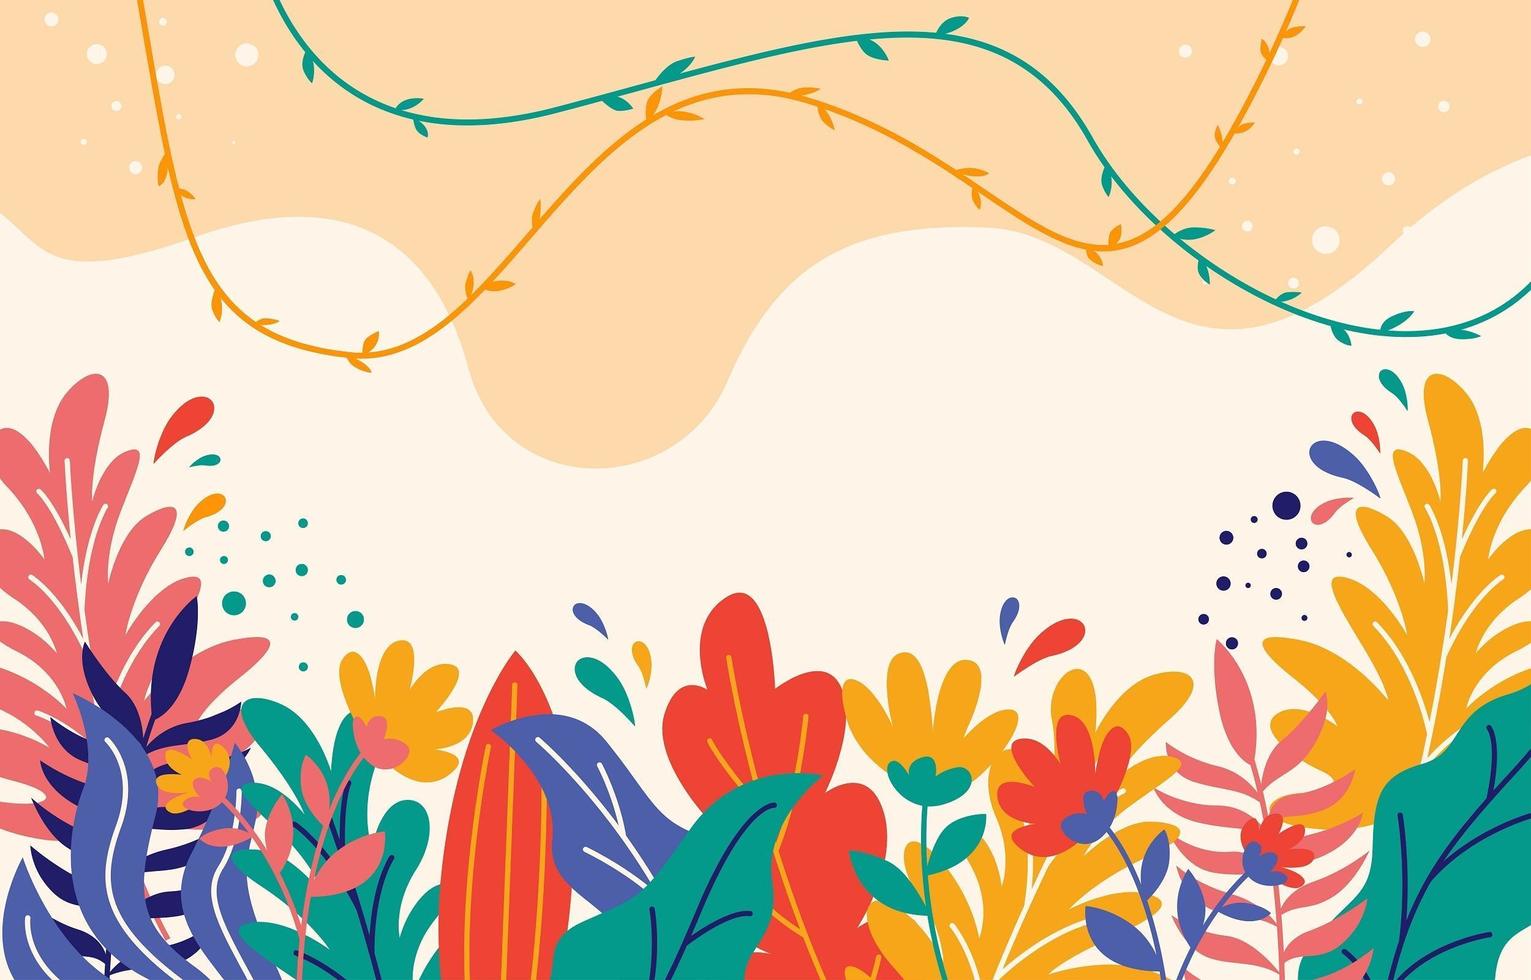 Floral Background in Flat Design Style vector